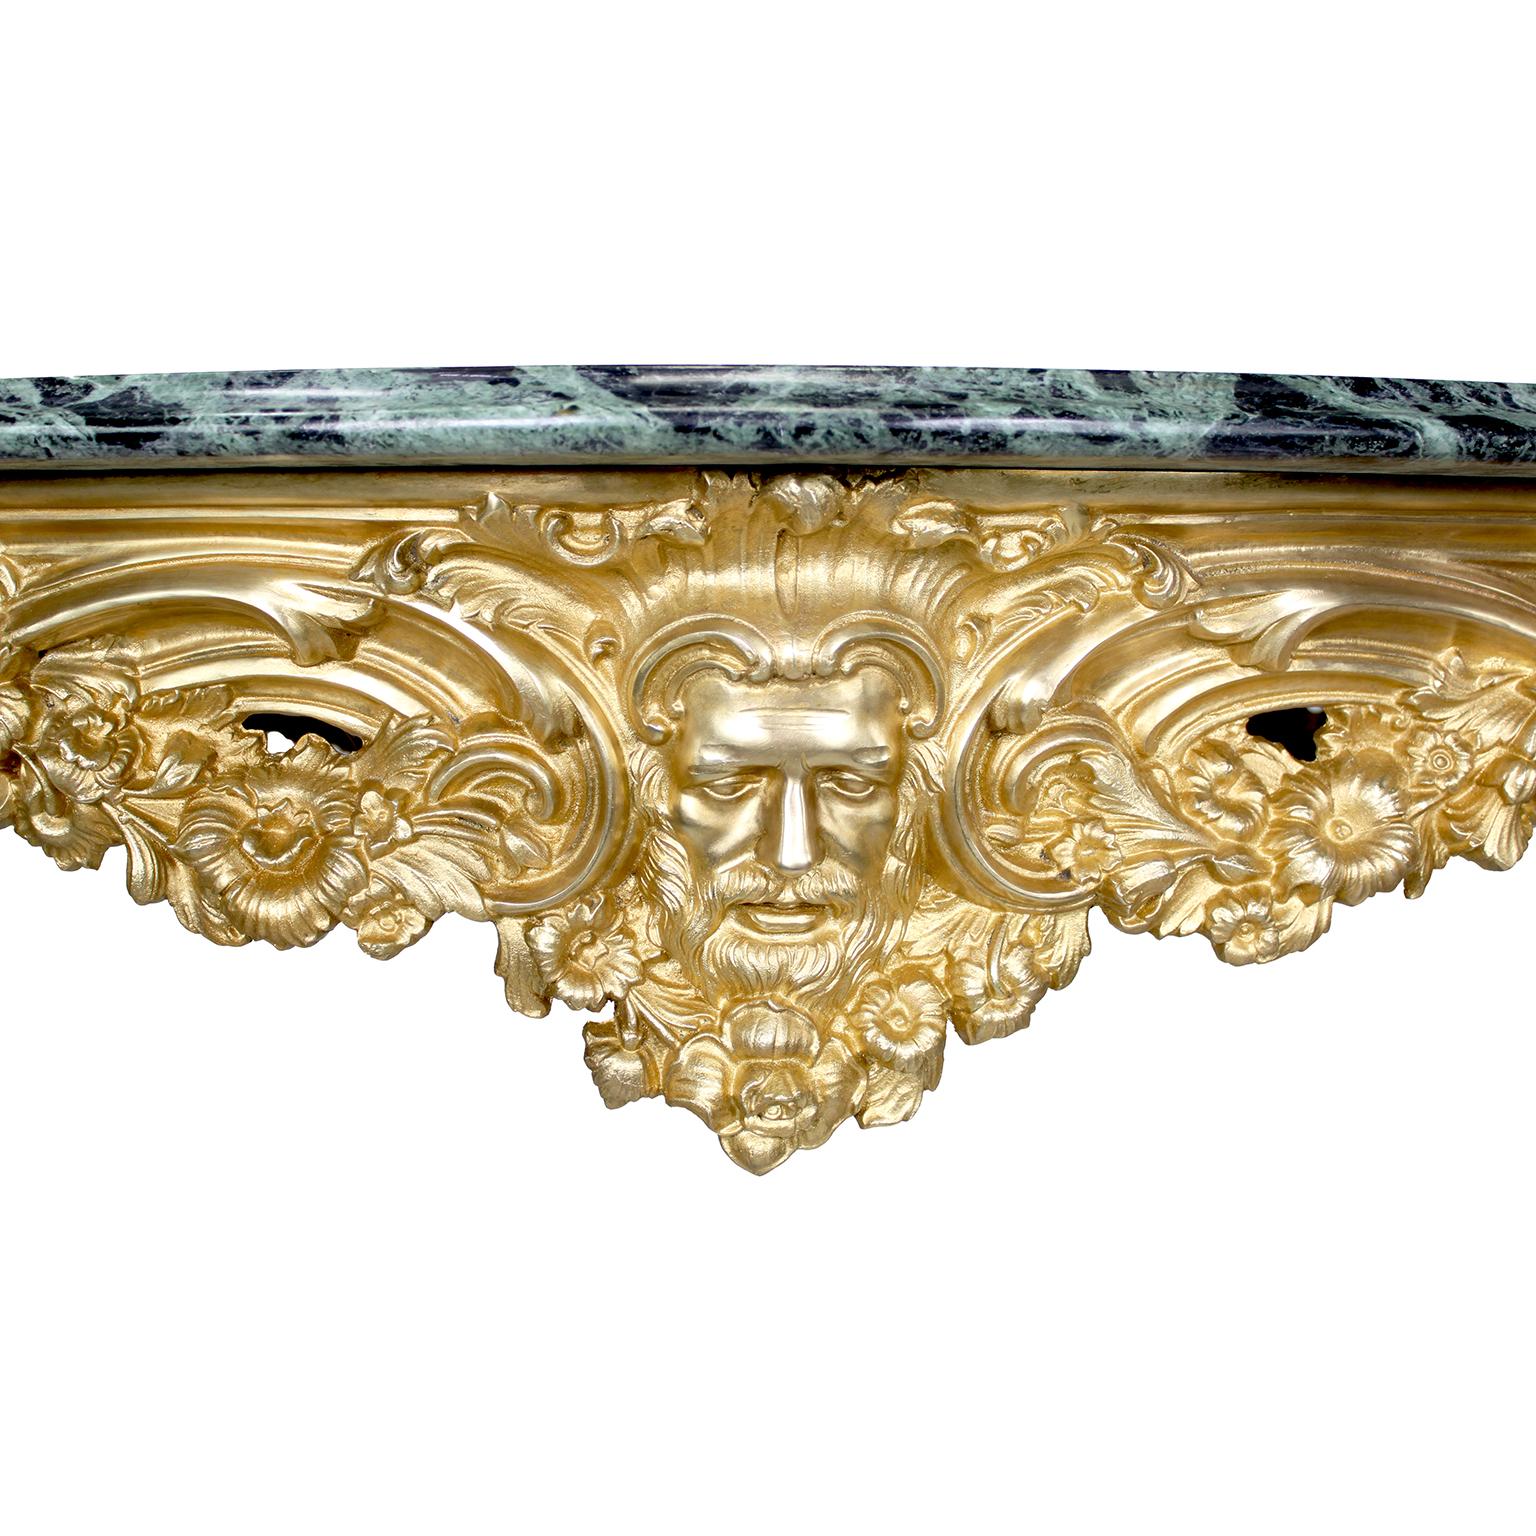 Pair Italian Early 20th Century Rococo-Style Gilt-Bronze Center Tables/Consoles  For Sale 7